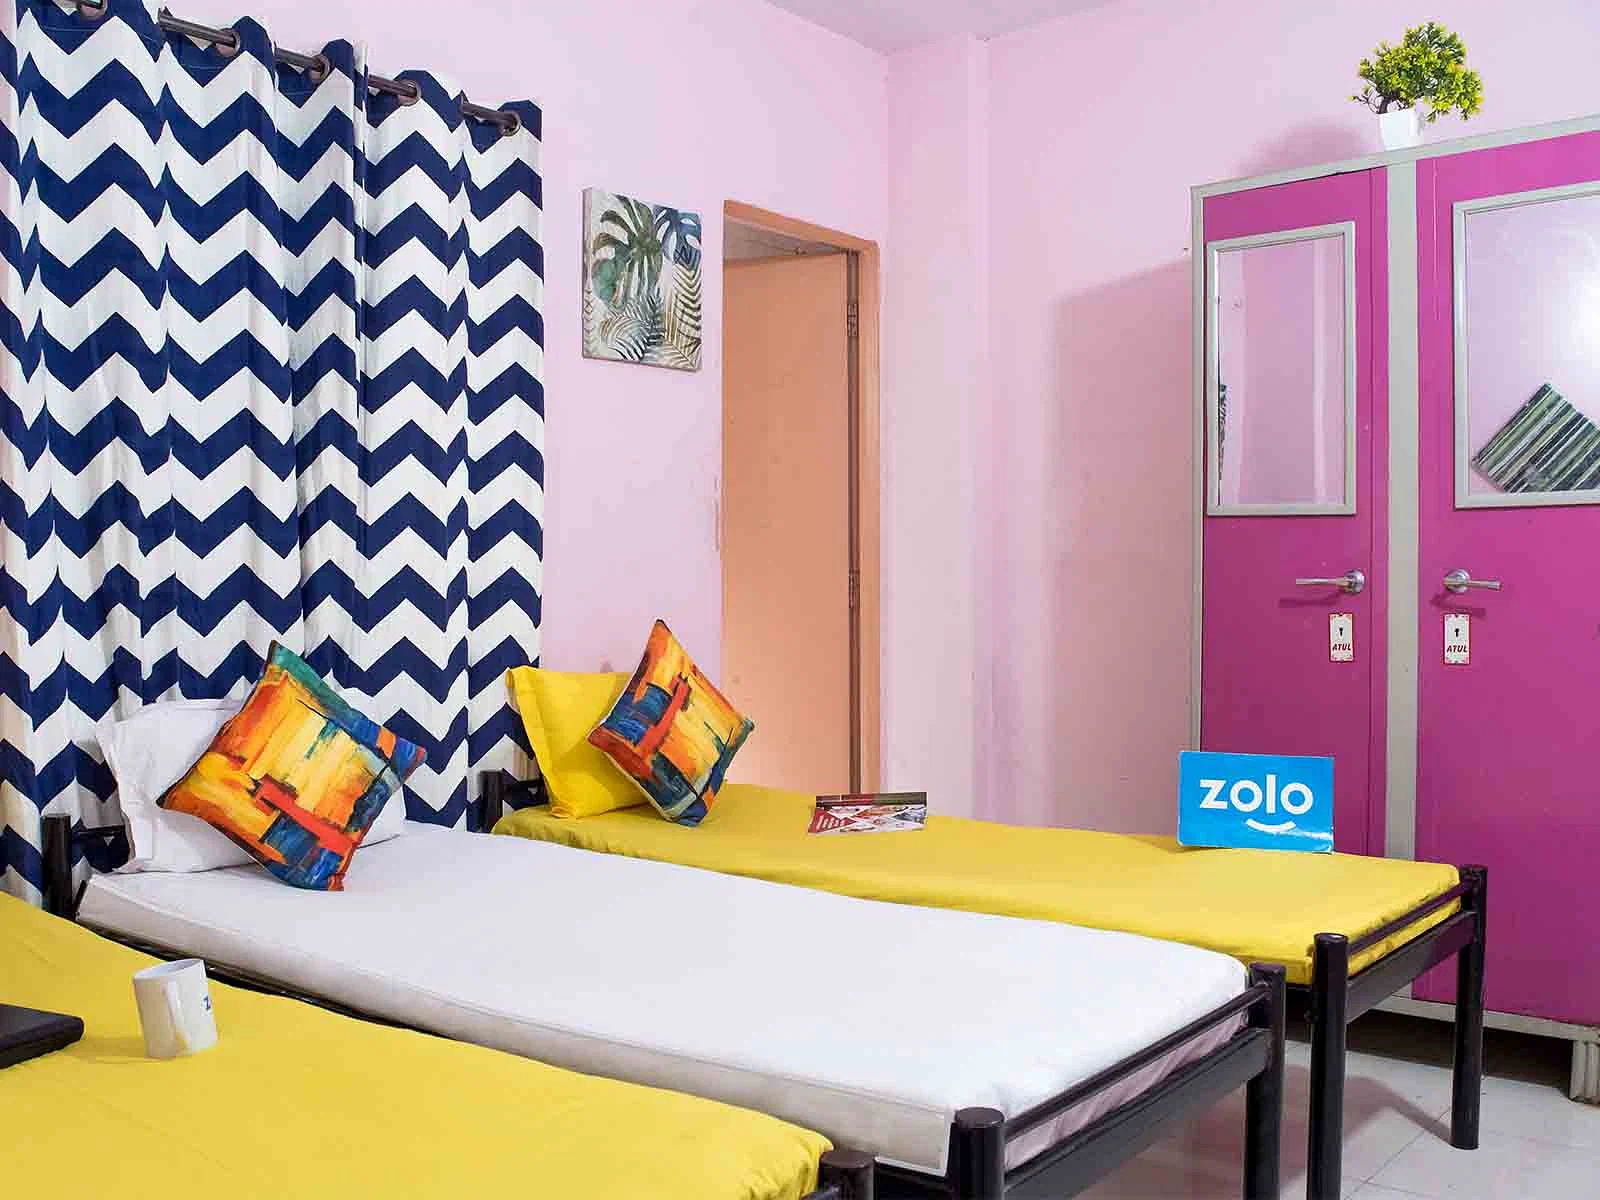 budget-friendly PGs and hostels for gents with single rooms with daily hopusekeeping-Zolo Rainbow for Men